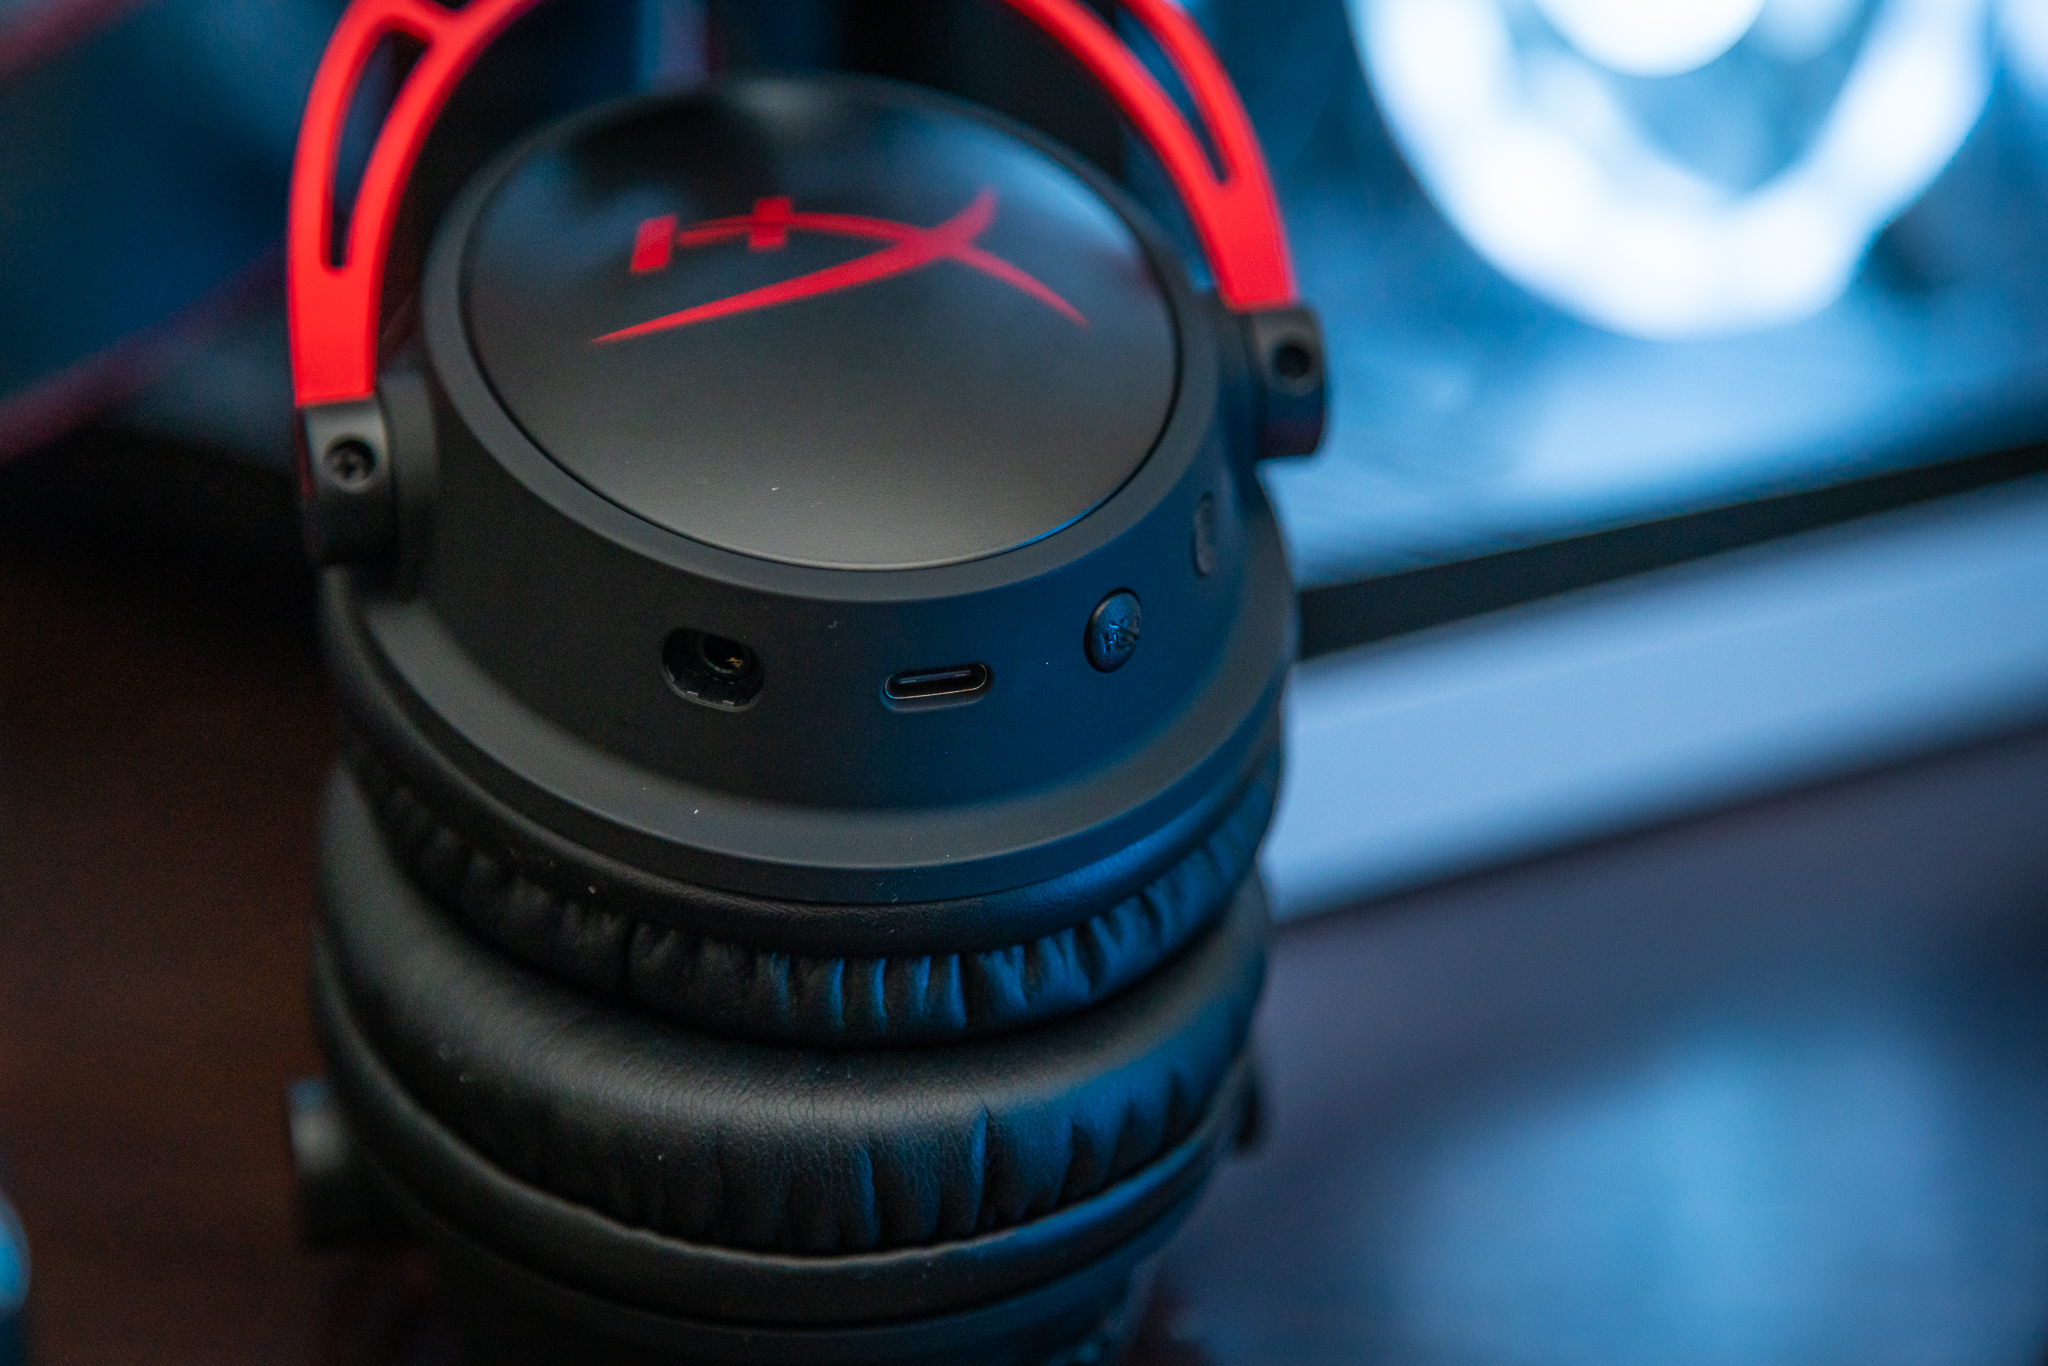 HyperX Cloud Alpha Wireless Gaming Headset Review: It Goes Long - CNET